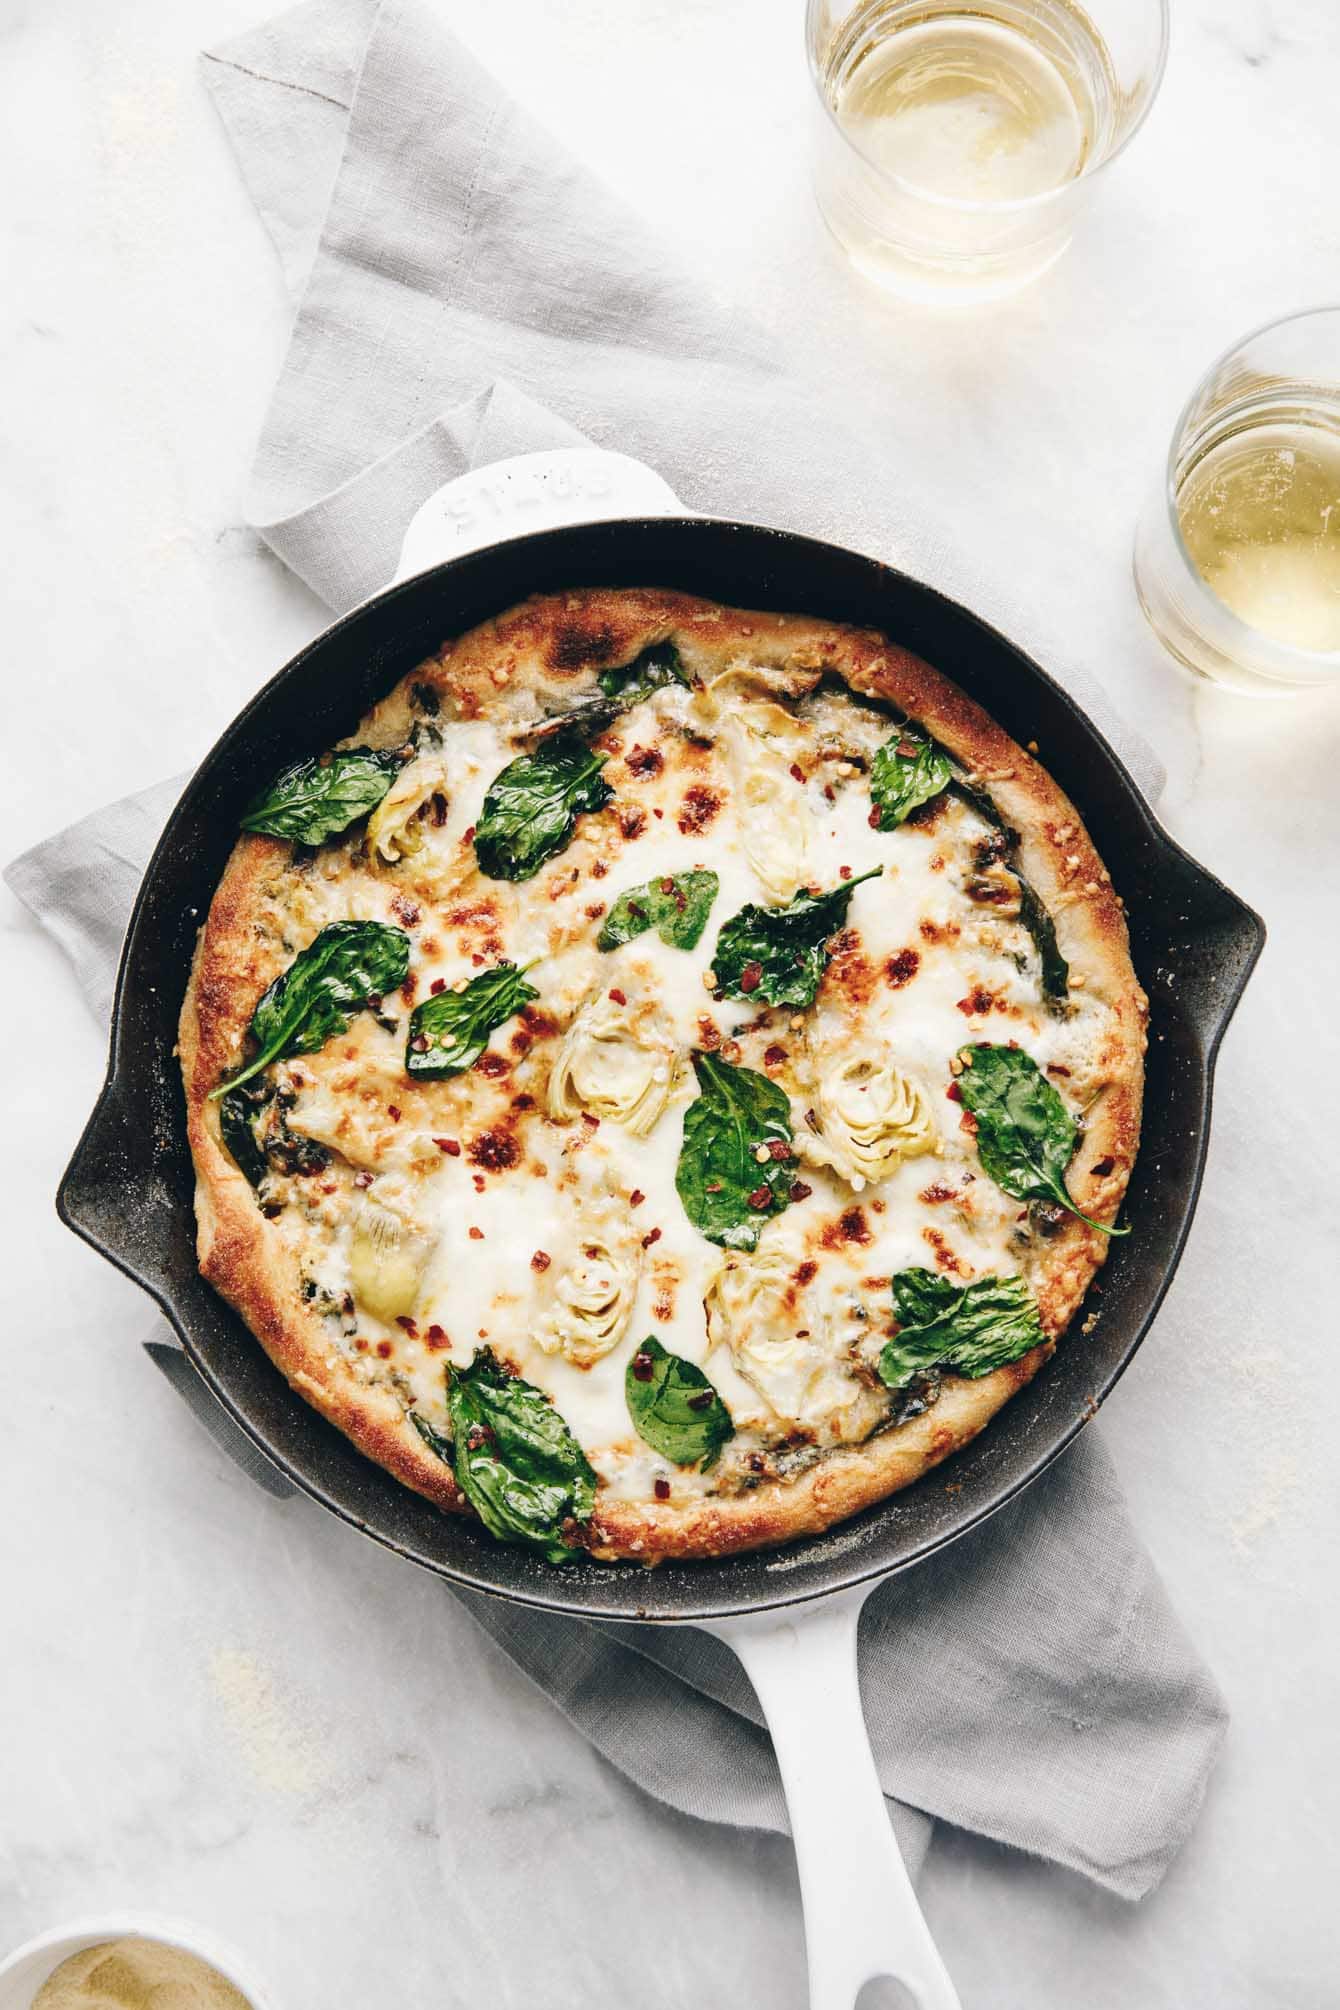 Easy cheesy spinach artichoke pizza so delicious, you'll eat the whole pie yourself